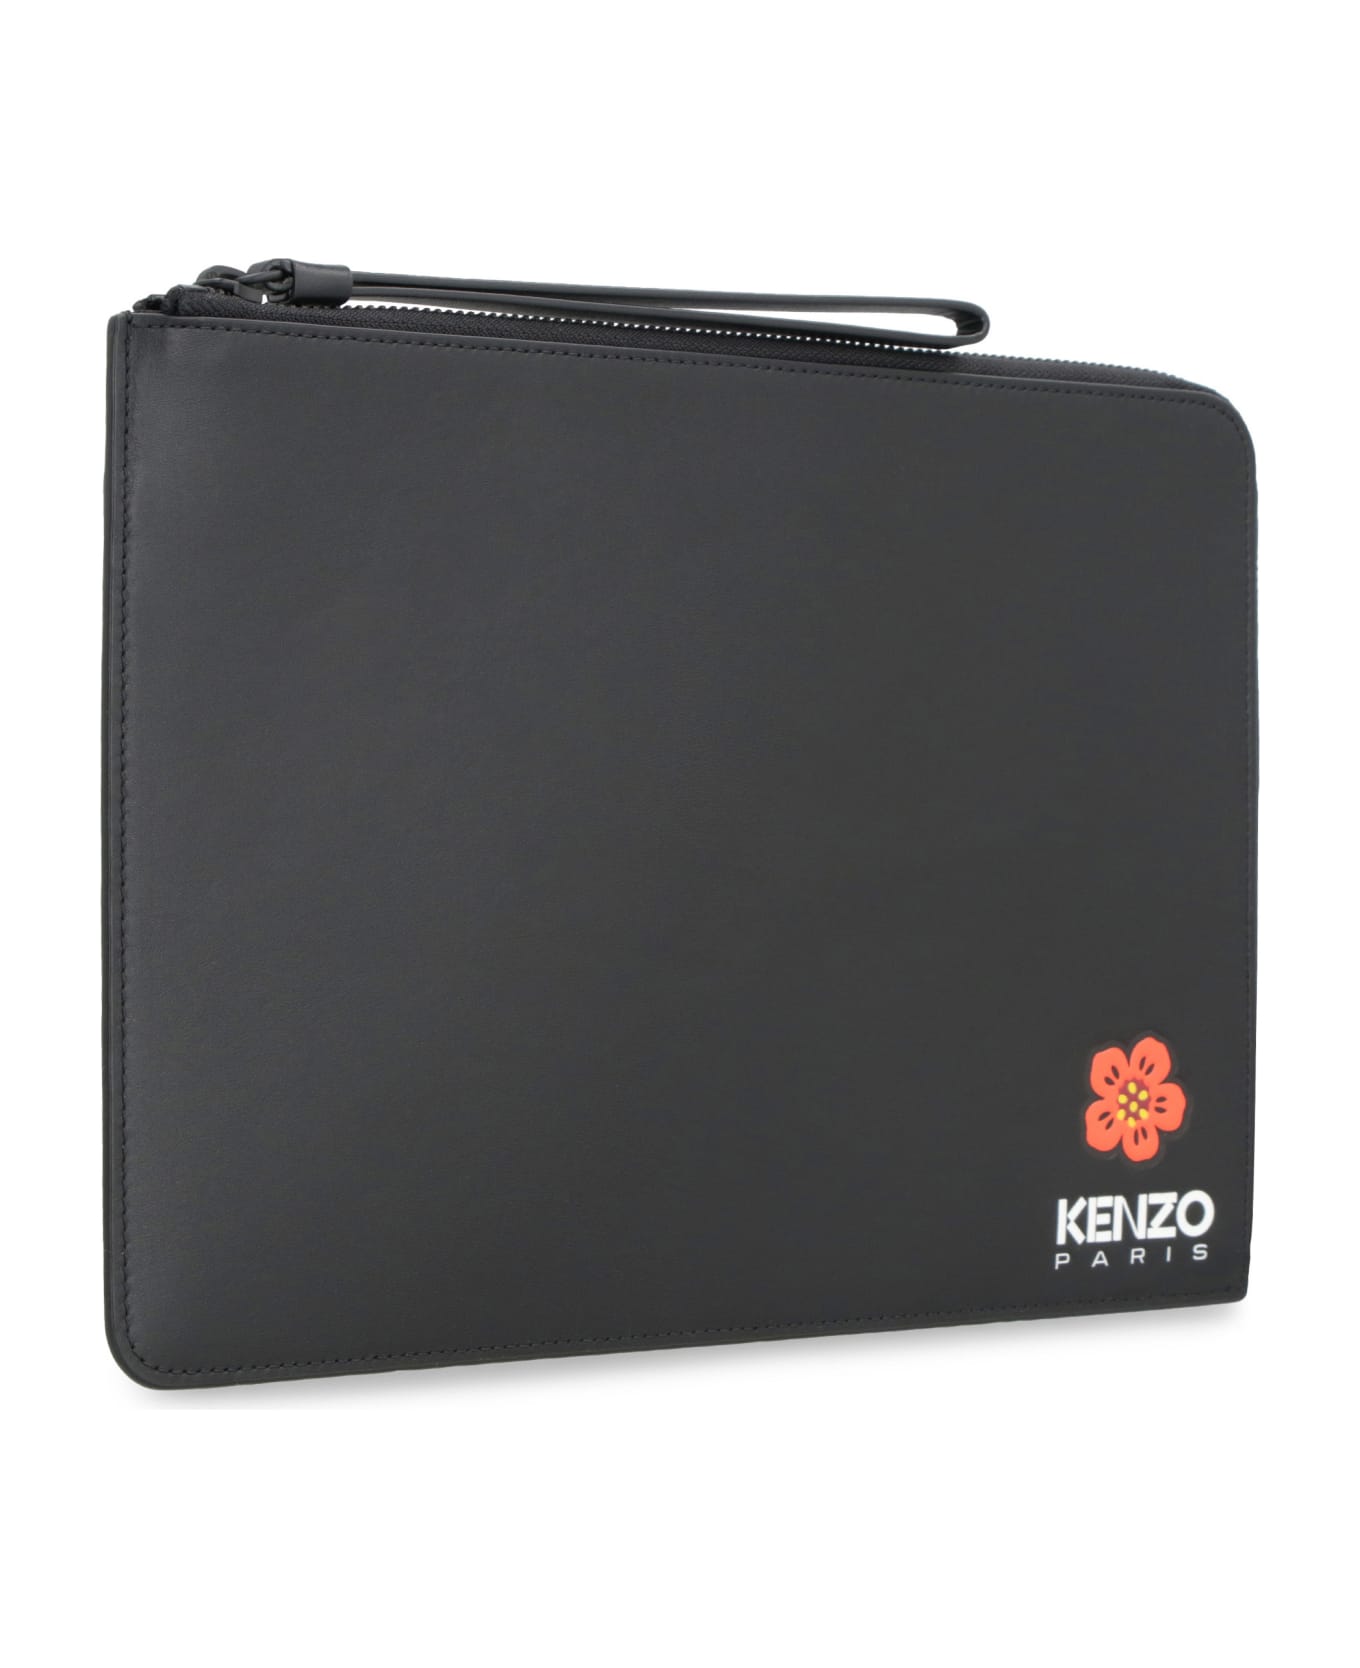 Kenzo Leather Flat Pouch - black バッグ